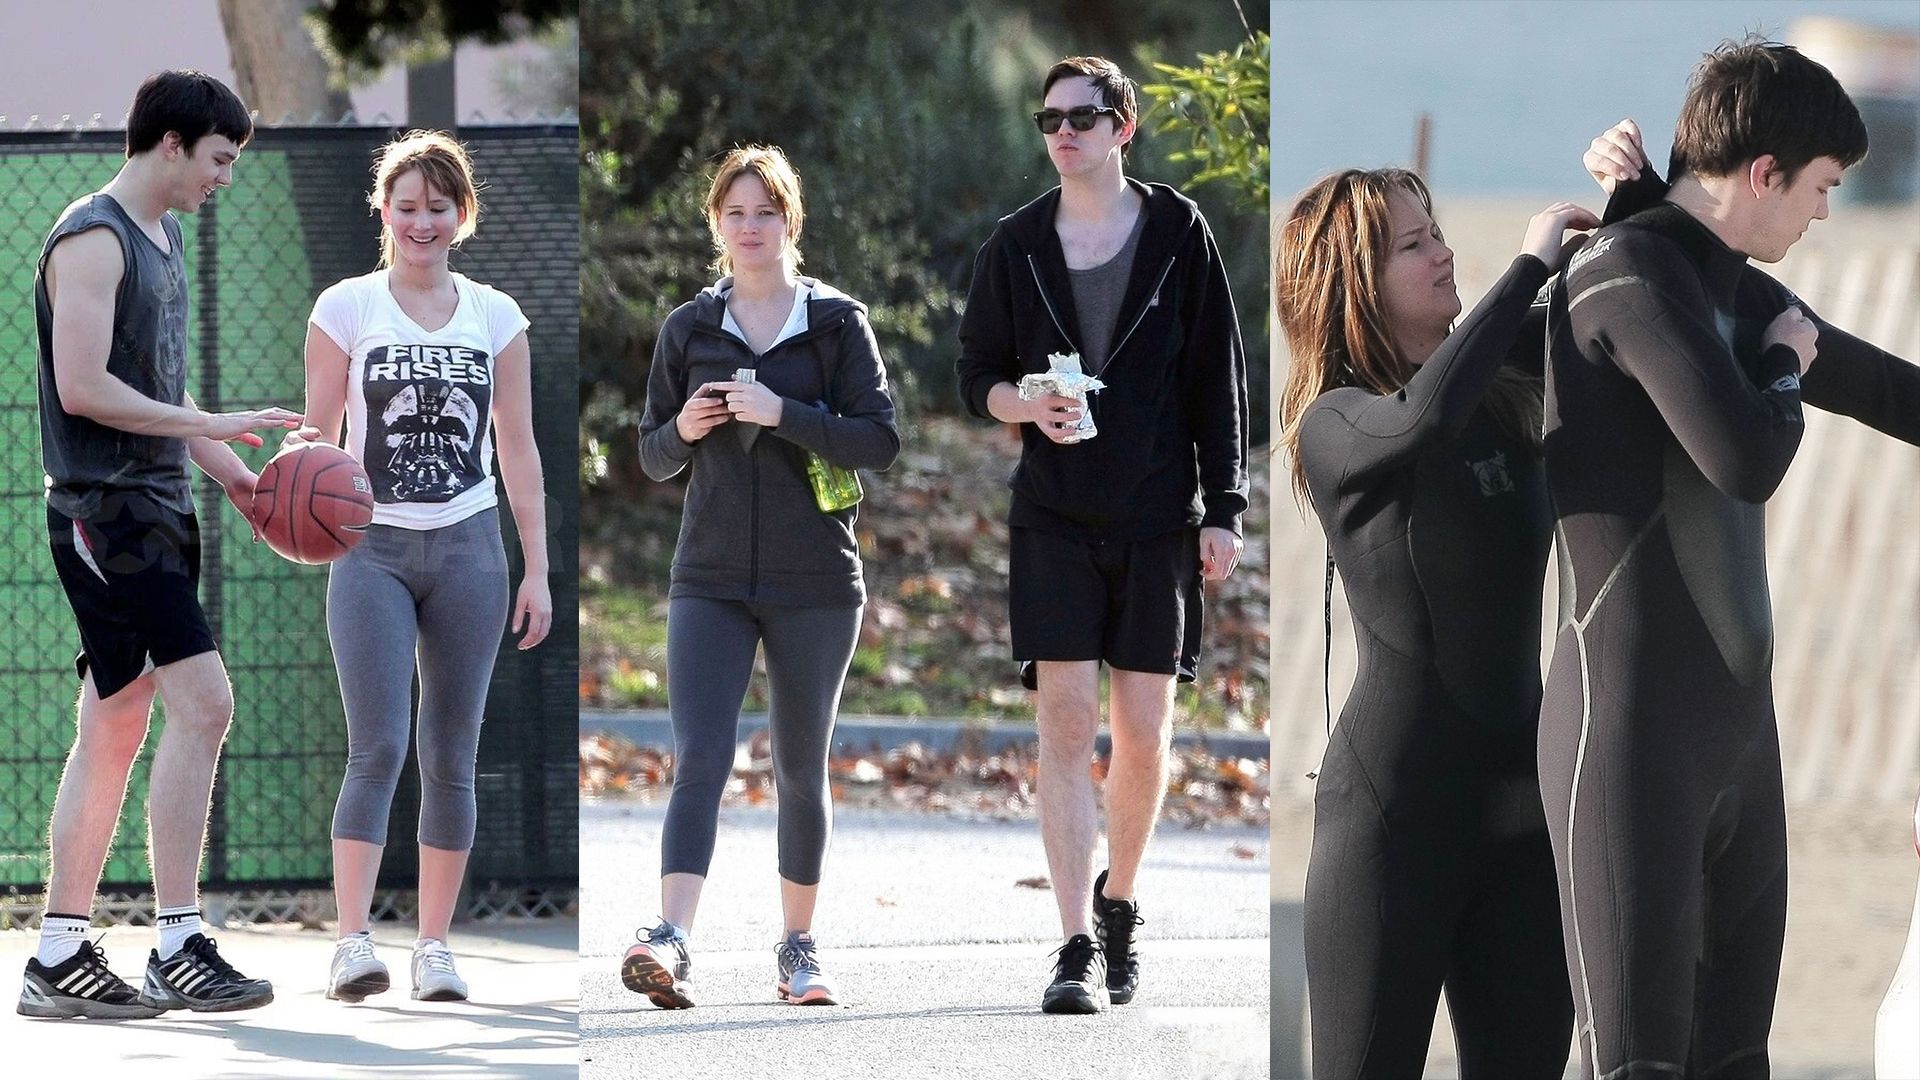 Nicholas Hoult and Jennifer Lawrence still manage to spend quality time together